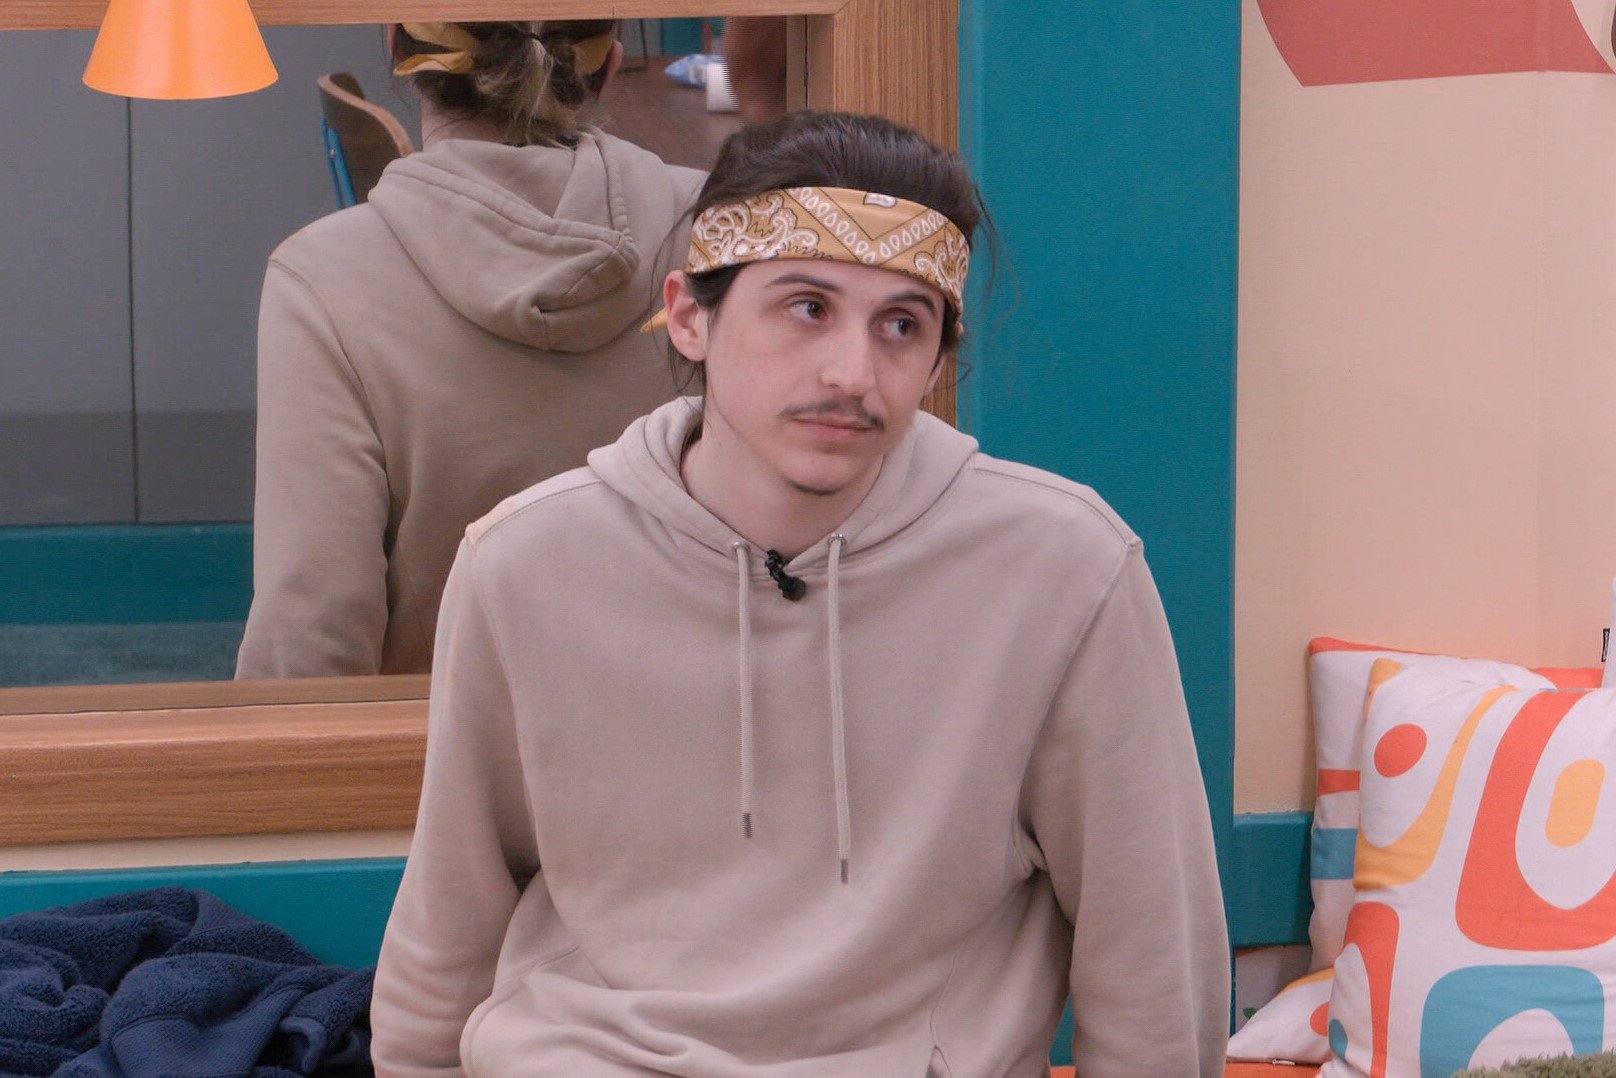 Matthew Turner, who is not currently a part of the 'Big Brother 24' jury, wears a light gray hoodie